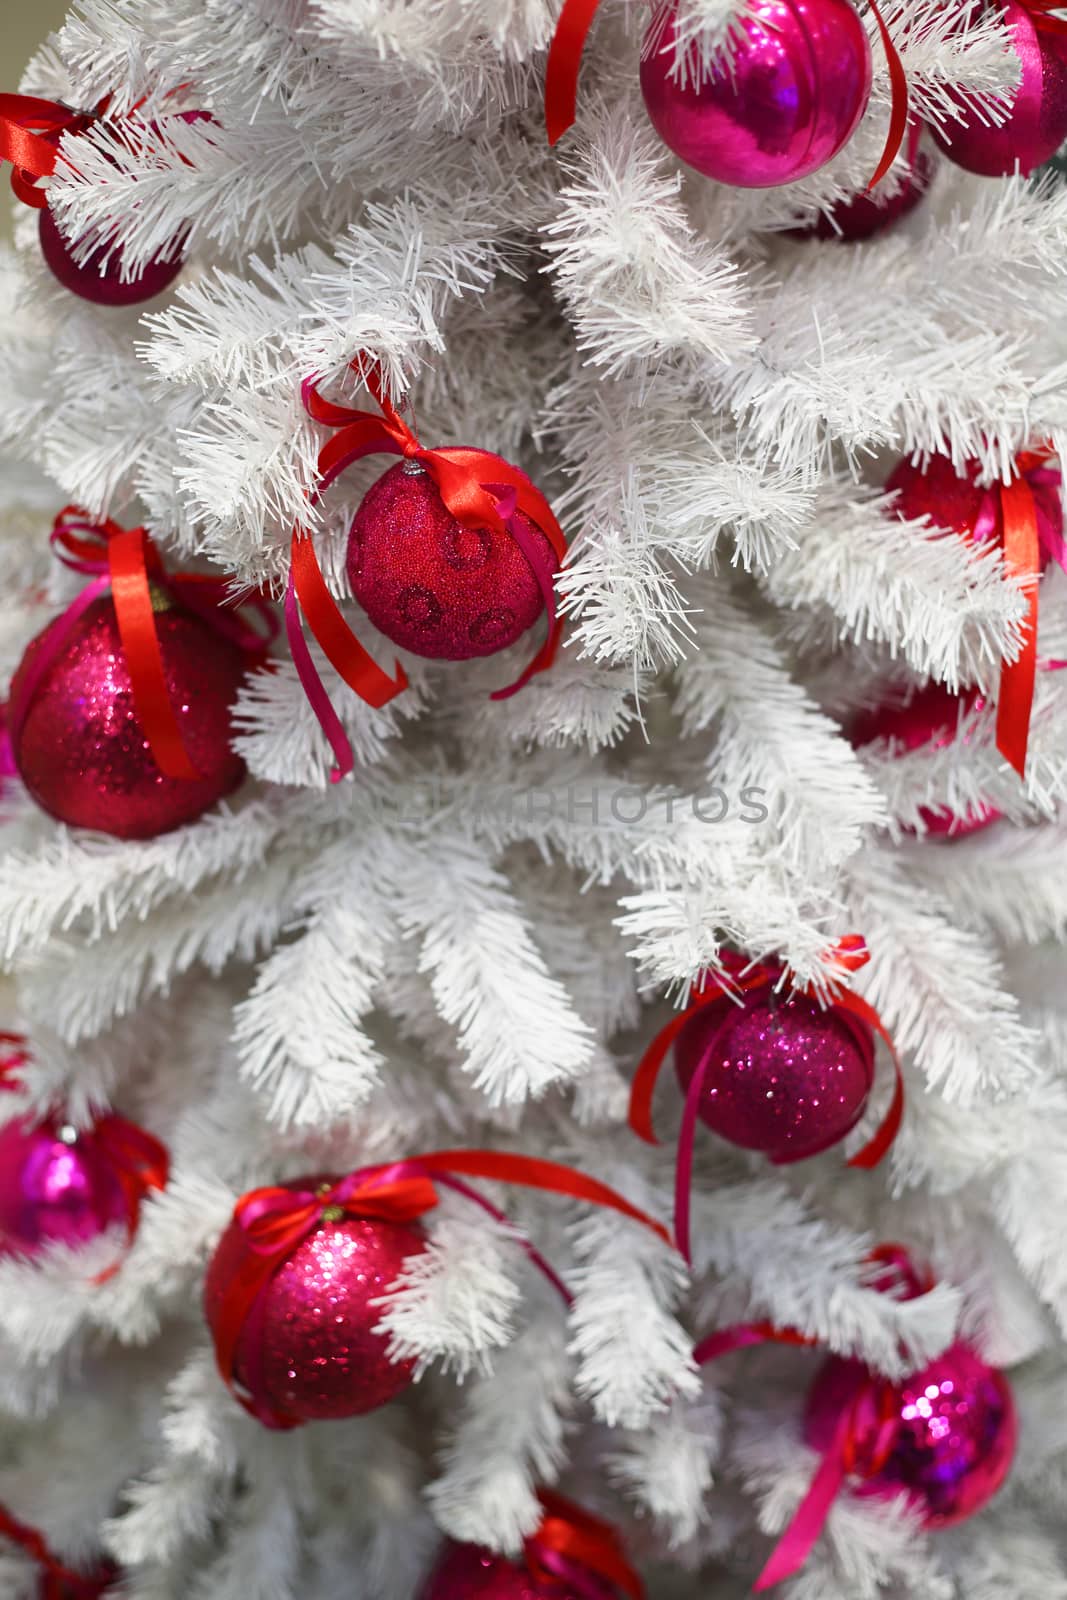 White Christmas tree with red decorative baubles close-up